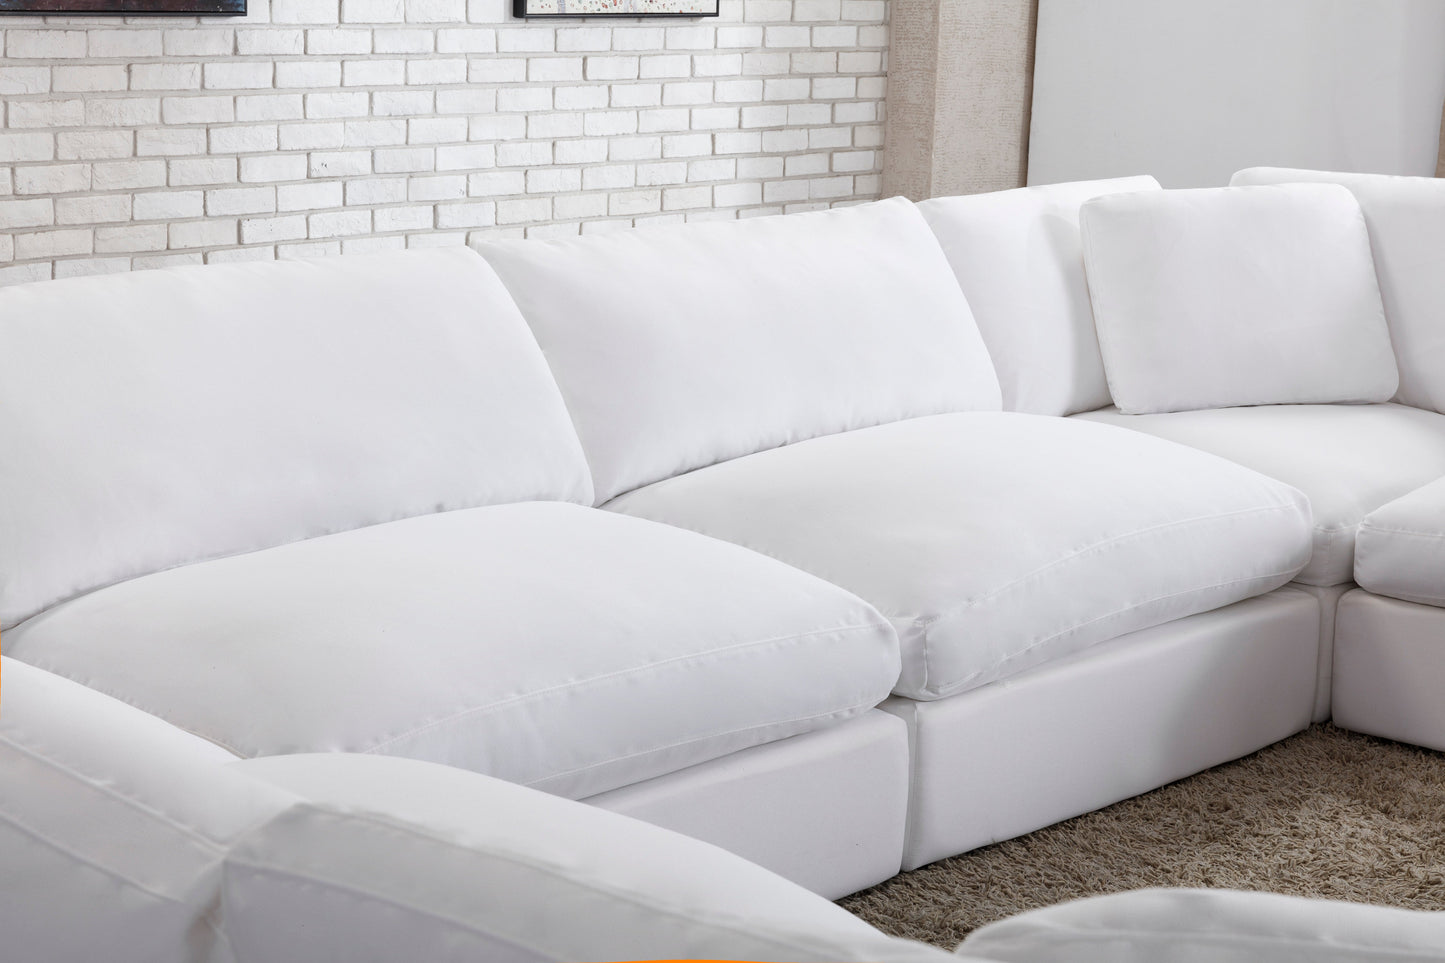 Rivas Contemporary Feather Fill 8-Piece Modular Sectional Sofa with Two Ottomans, White